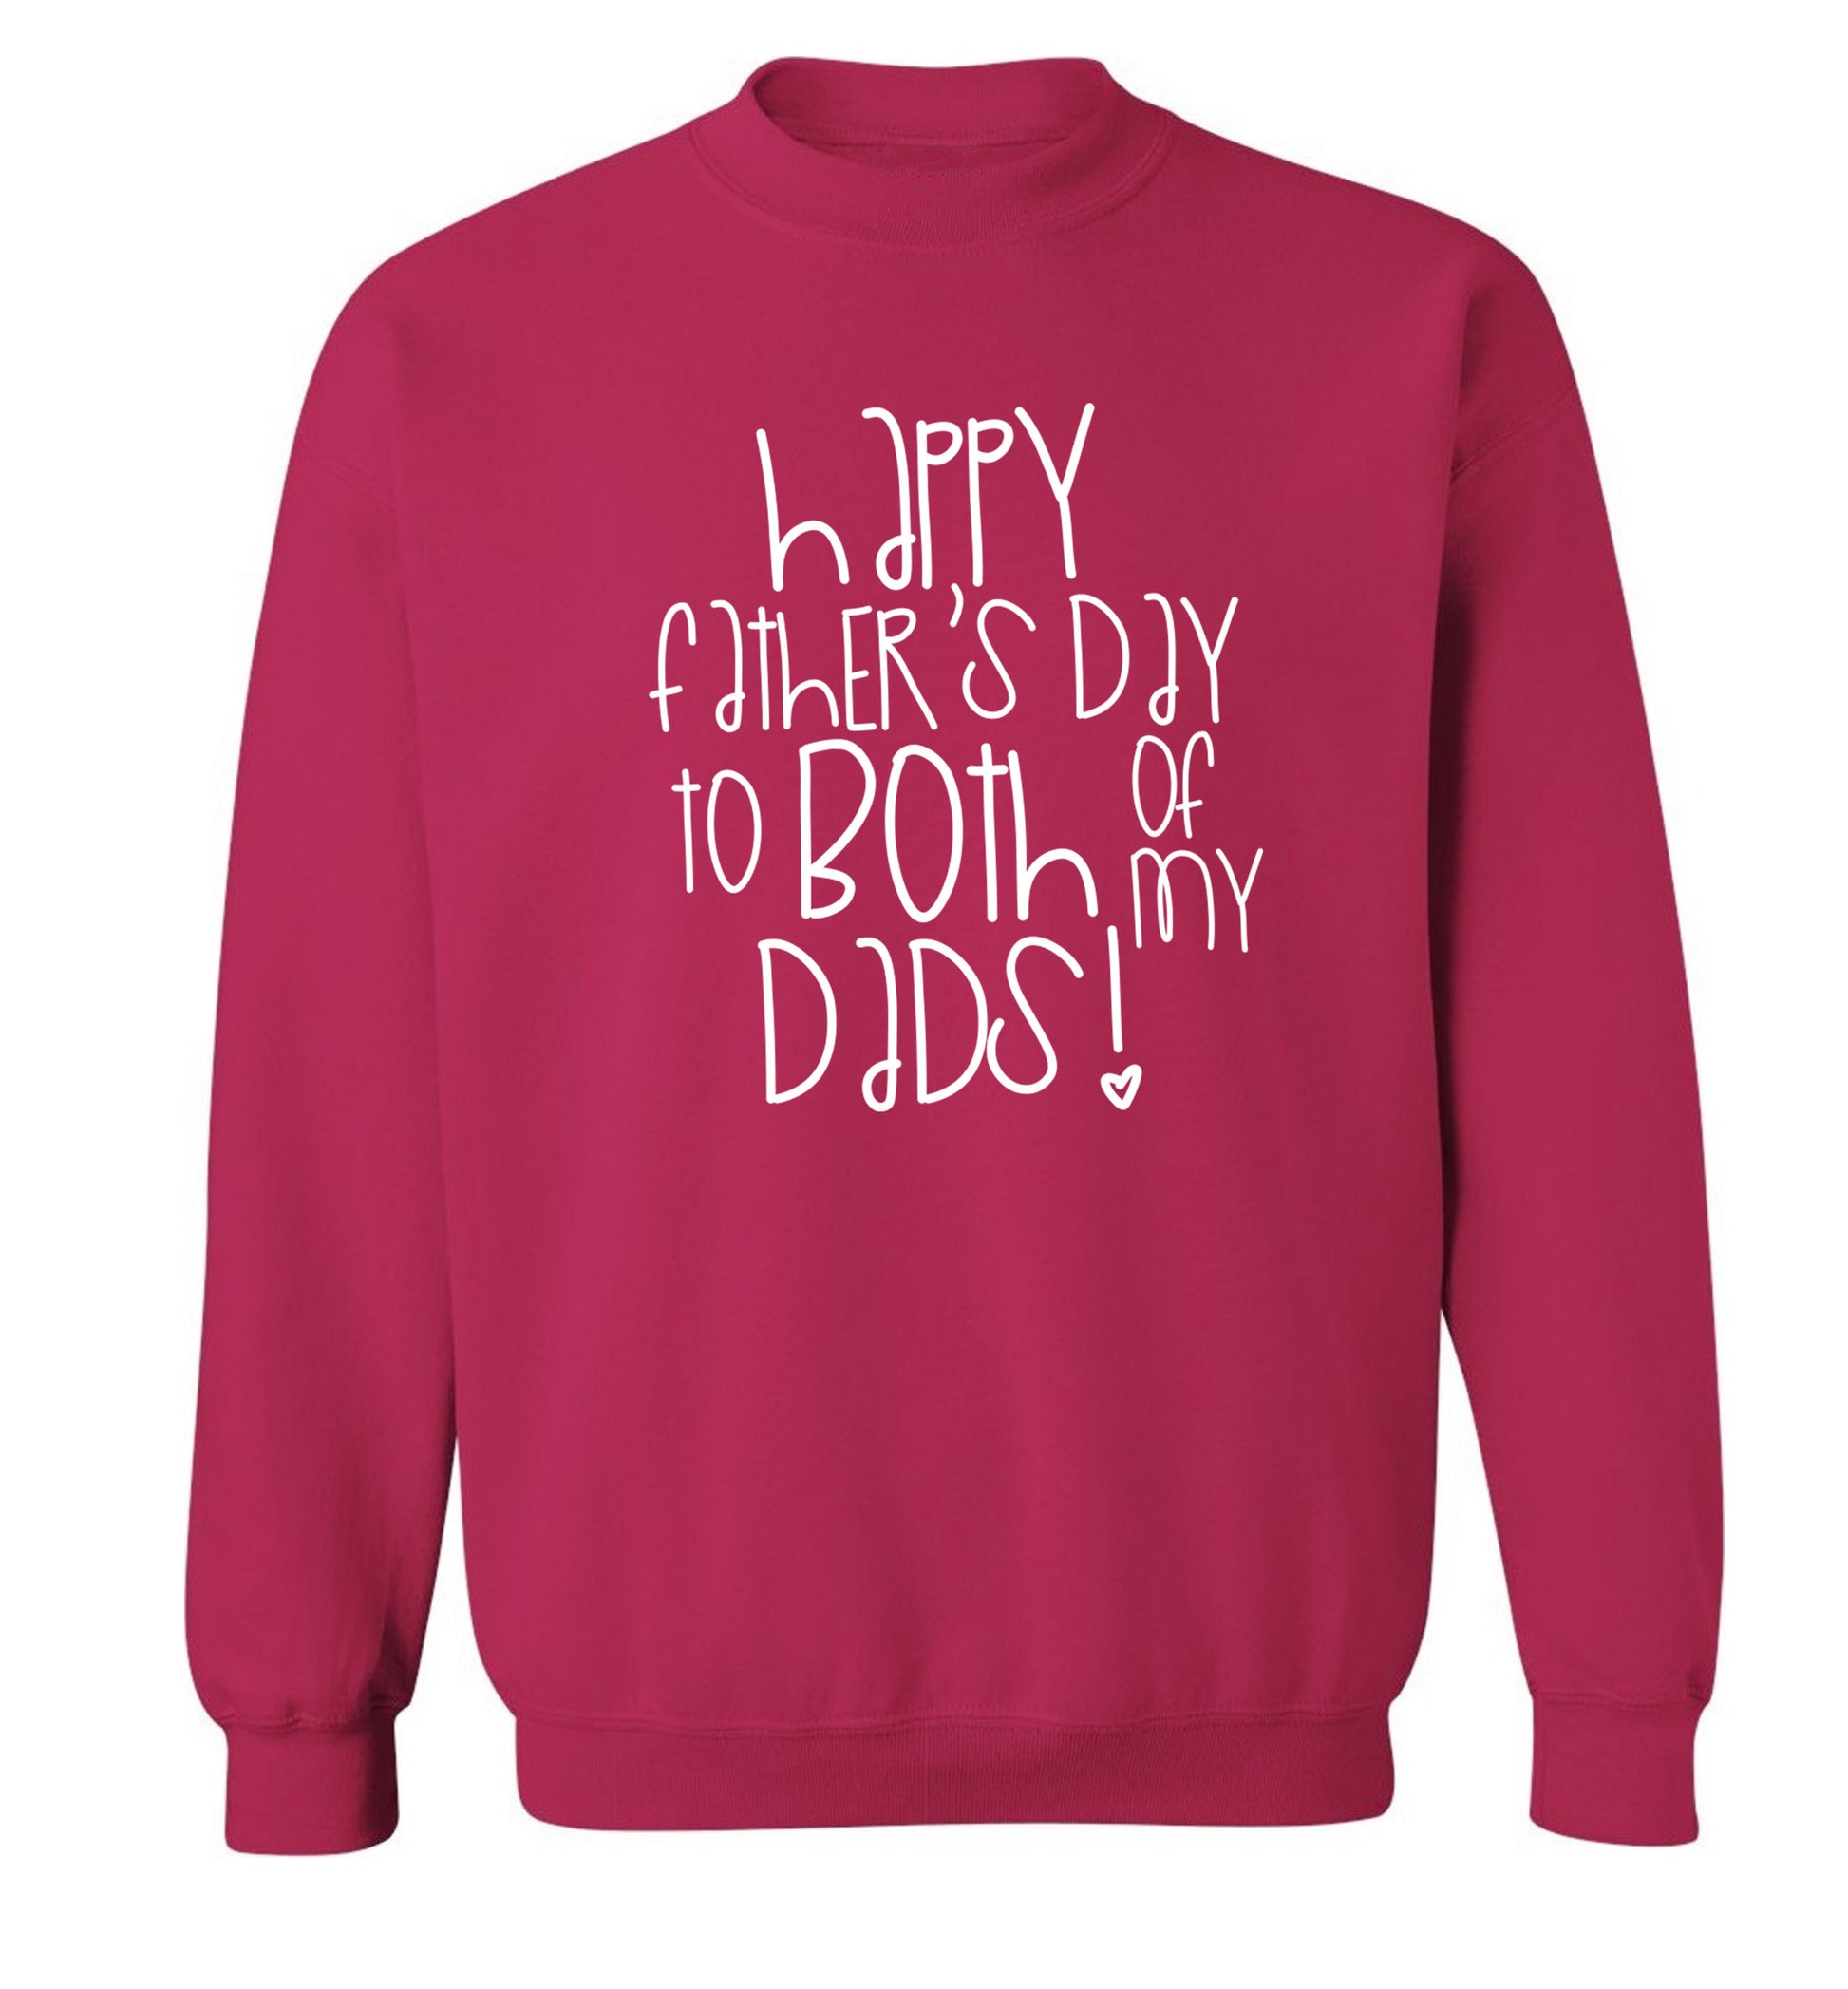 Happy father's day to both of my dads Adult's unisex pink Sweater 2XL